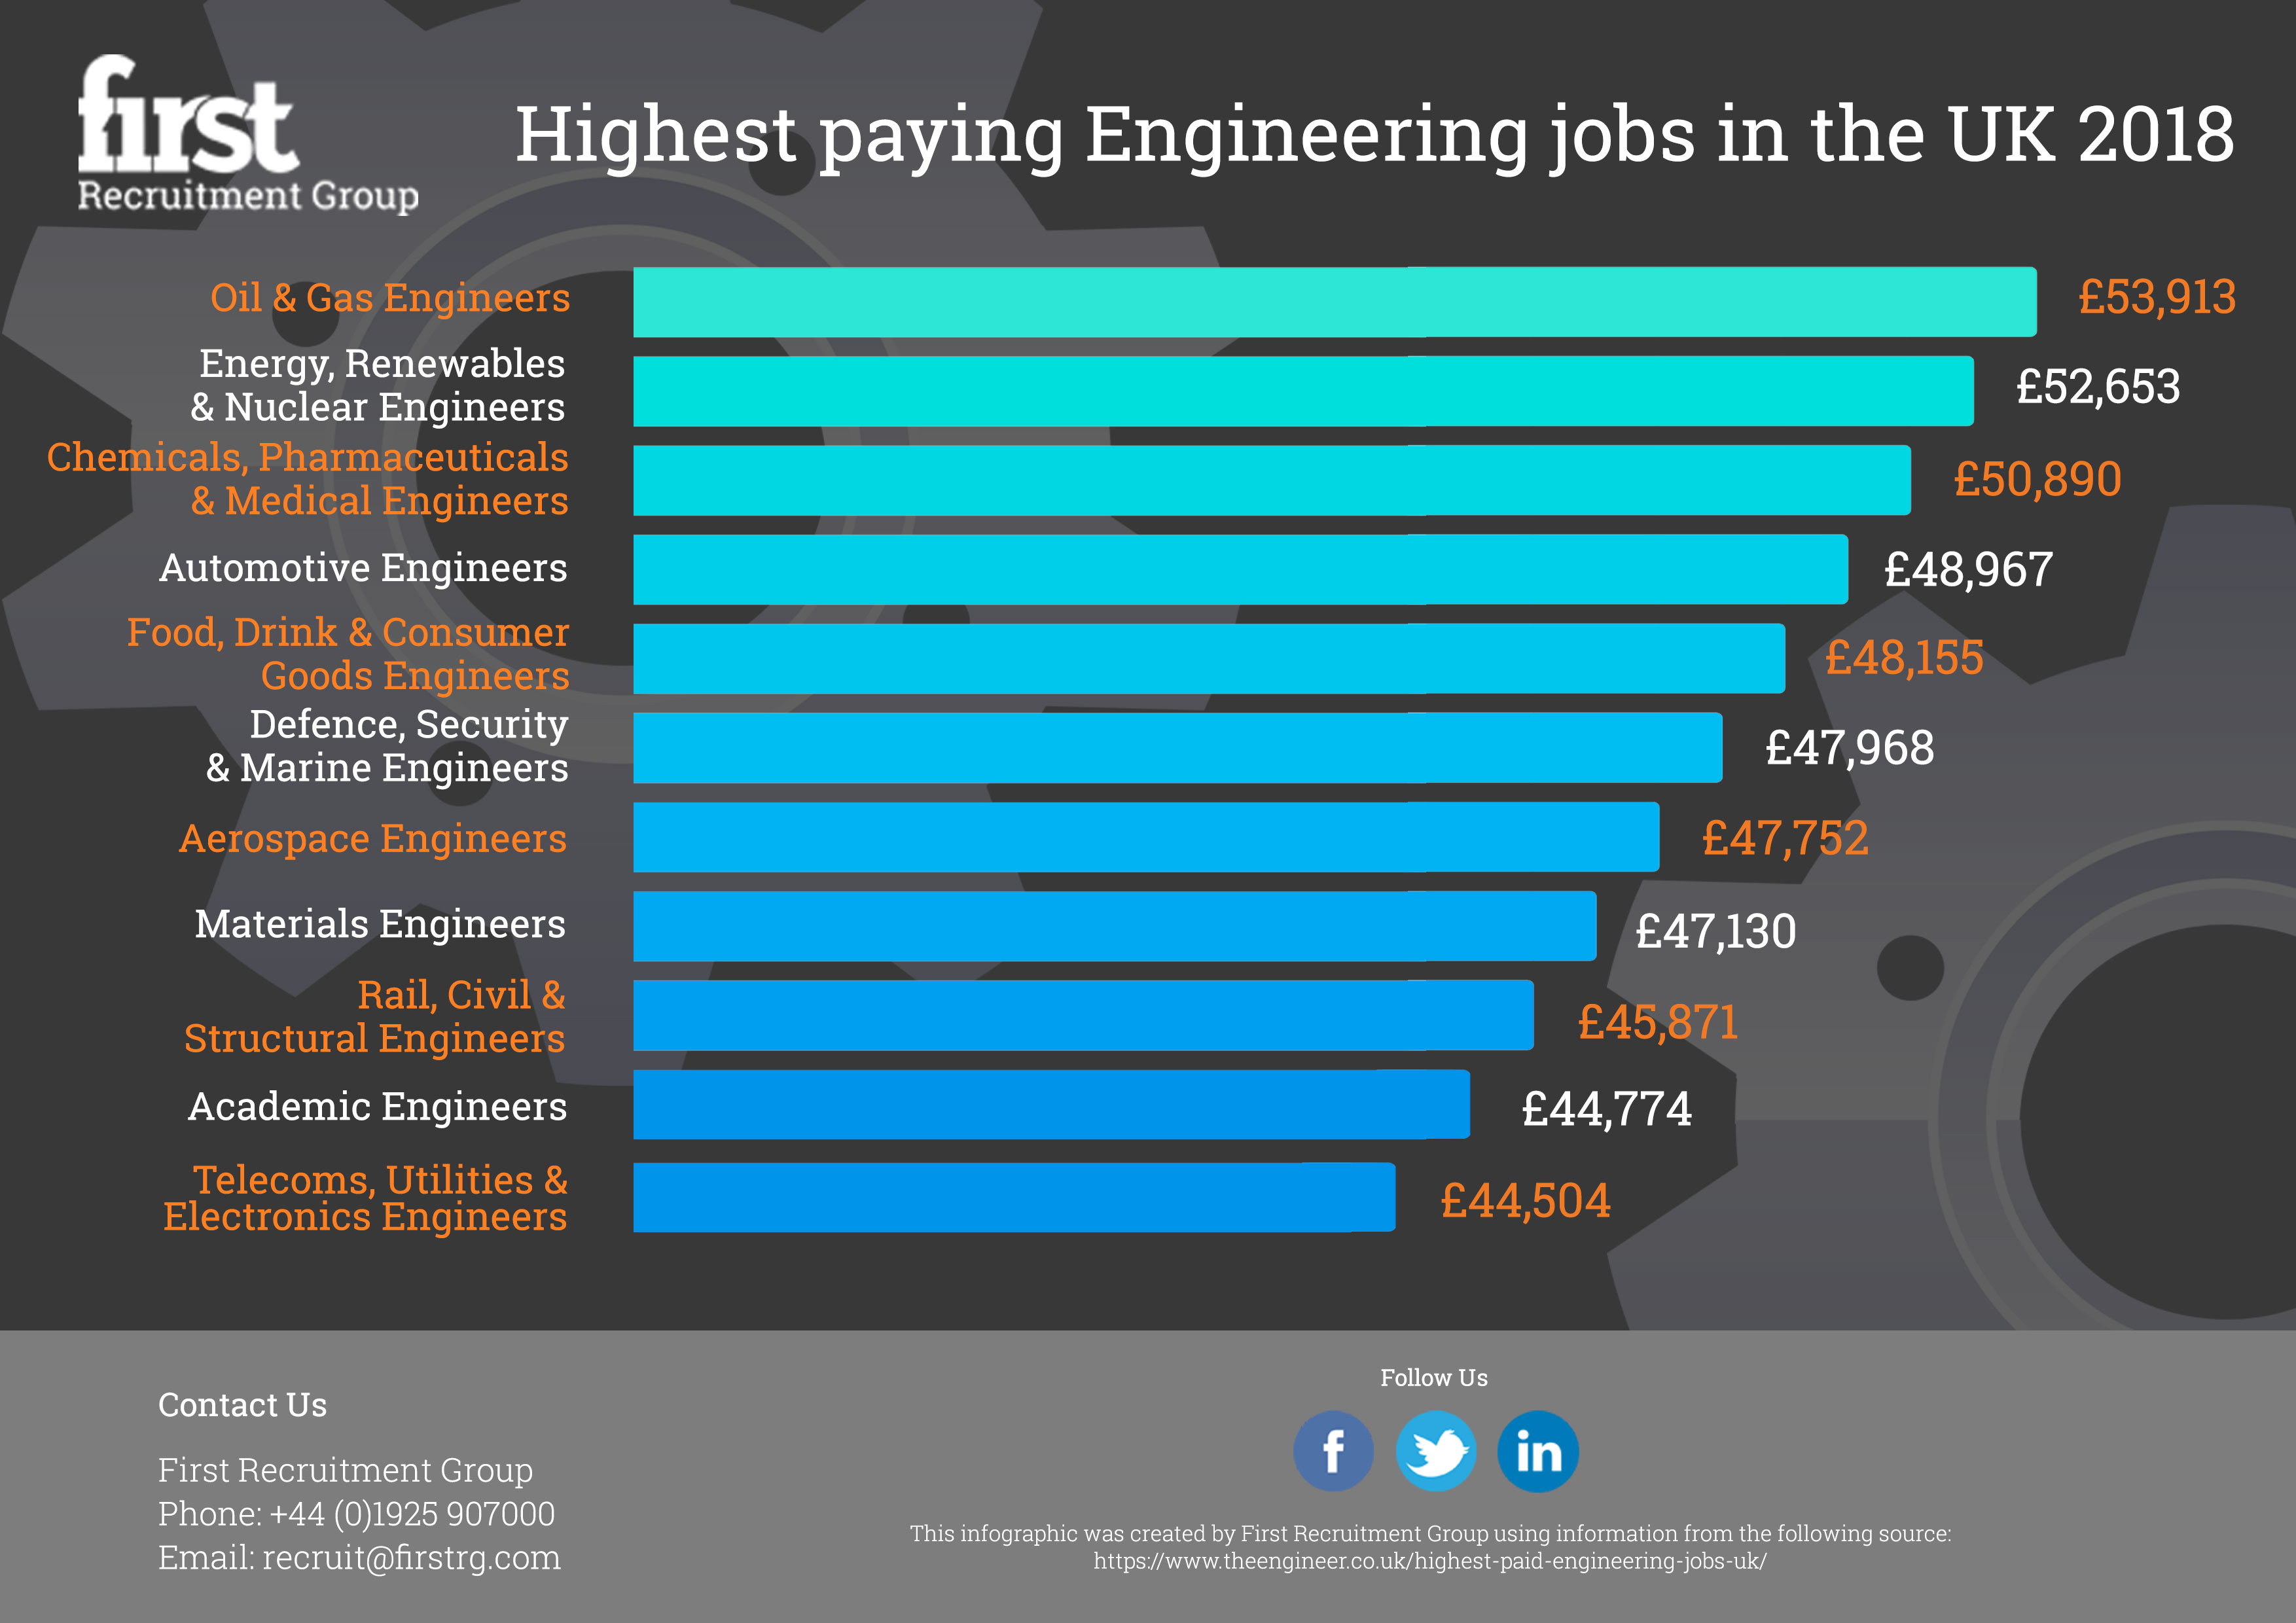 First Recruitment Group Oil And Gas Engineers Top The Highest Paid